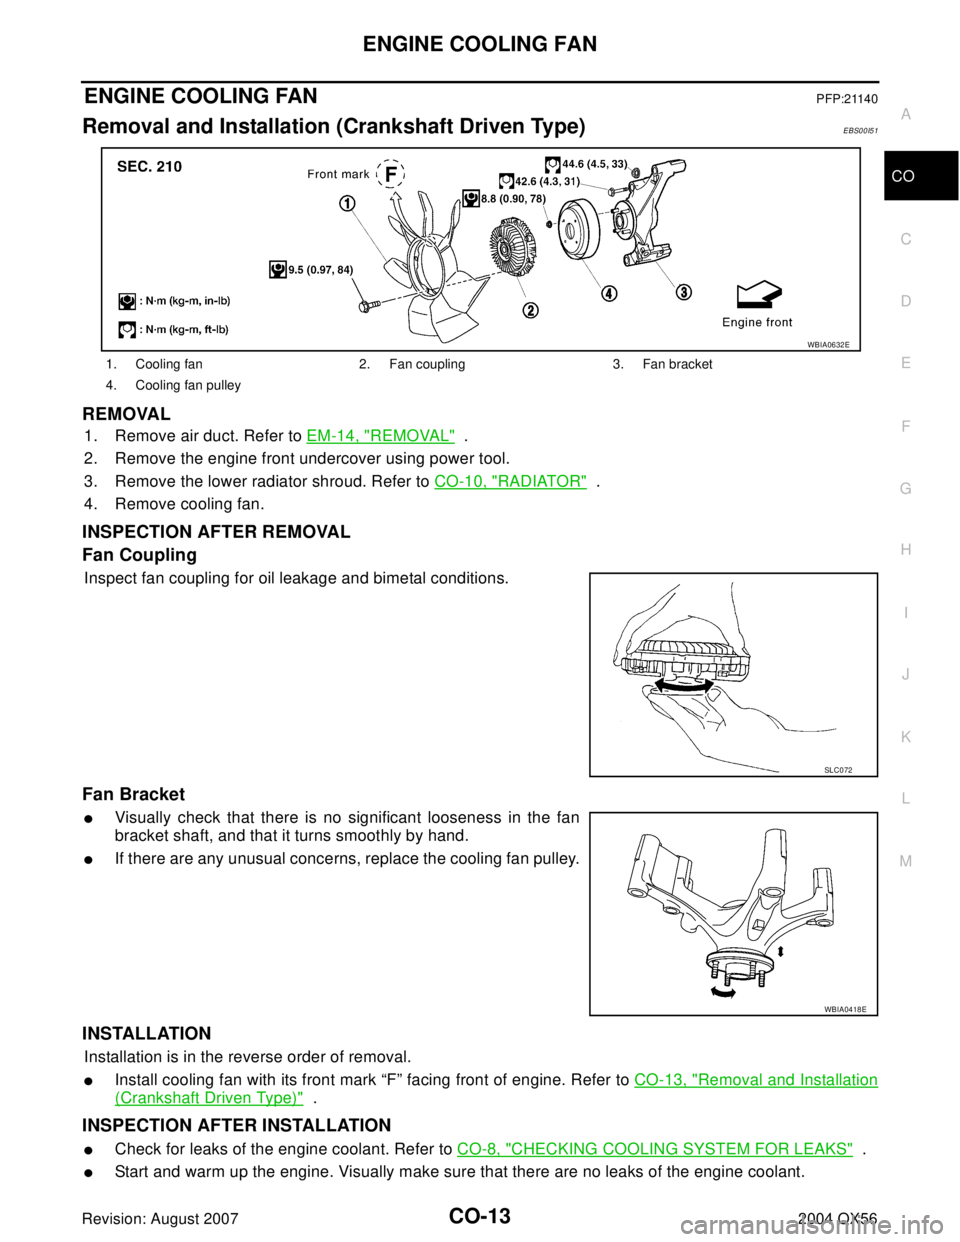 INFINITI QX56 2004  Factory Service Manual ENGINE COOLING FAN
CO-13
C
D
E
F
G
H
I
J
K
L
MA
CO
Revision: August 20072004 QX56
ENGINE COOLING FANPFP:21140
Removal and Installation (Crankshaft Driven Type)EBS00I51
REMOVAL
1. Remove air duct. Refe